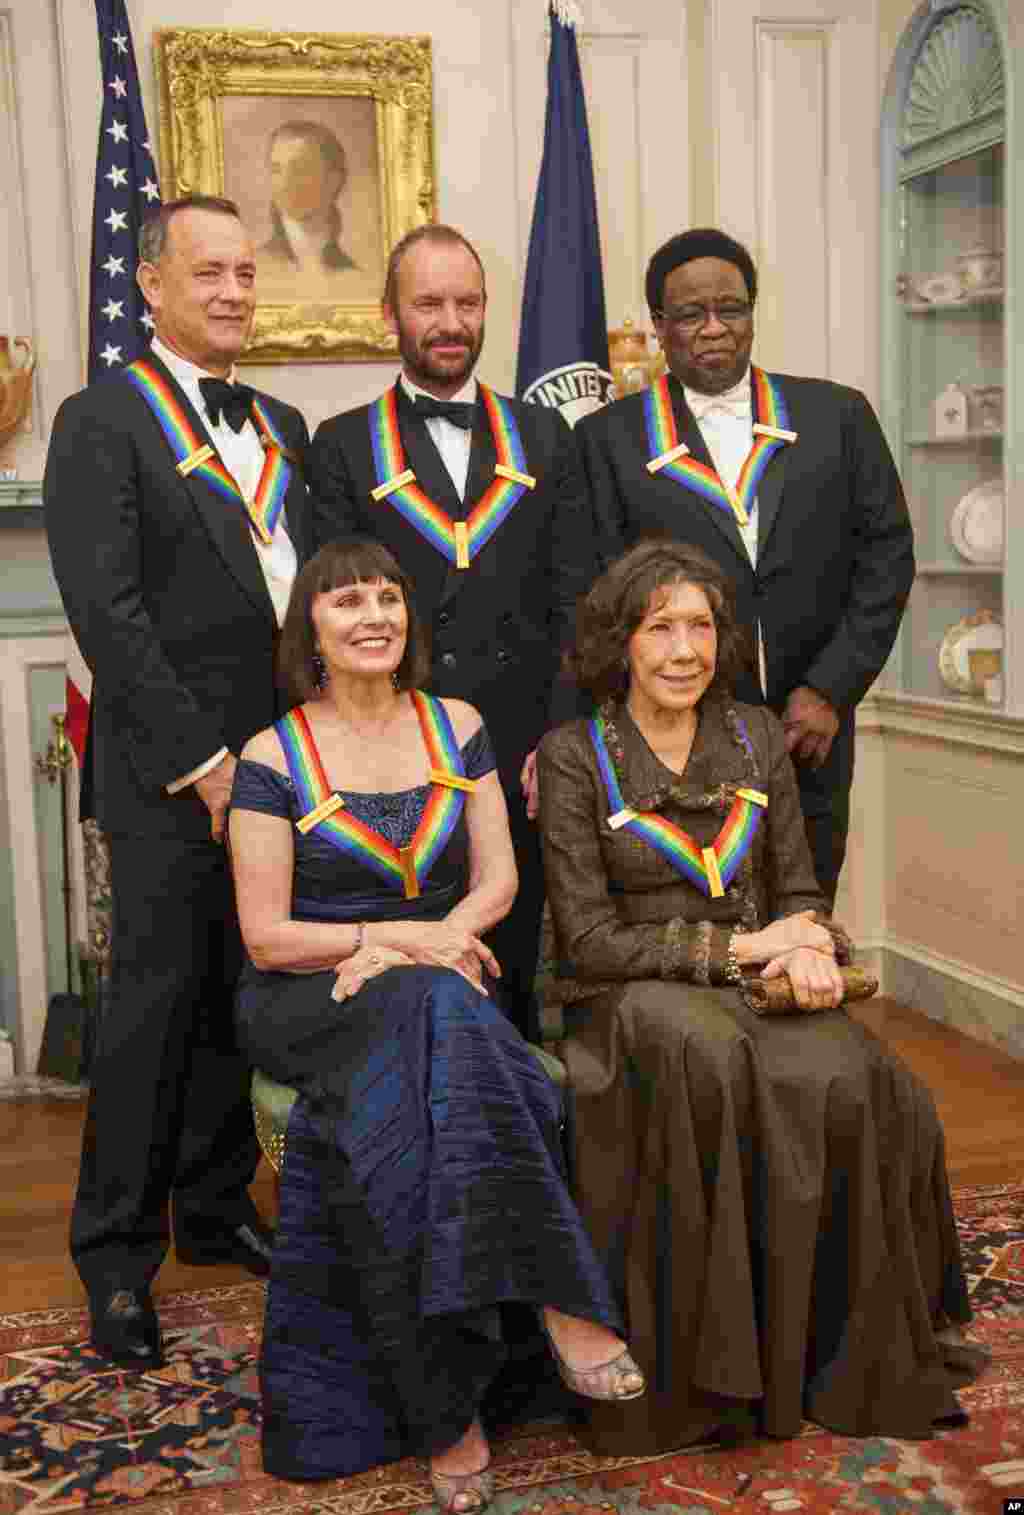 From left, 2014 Kennedy Center Honorees Tom Hanks, Patricia McBride, Sting, Lily Tomlin and Al Green pose for a photo following the State Department Dinner for the Kennedy Center Honors at the State Department, Dec. 6, 2014.